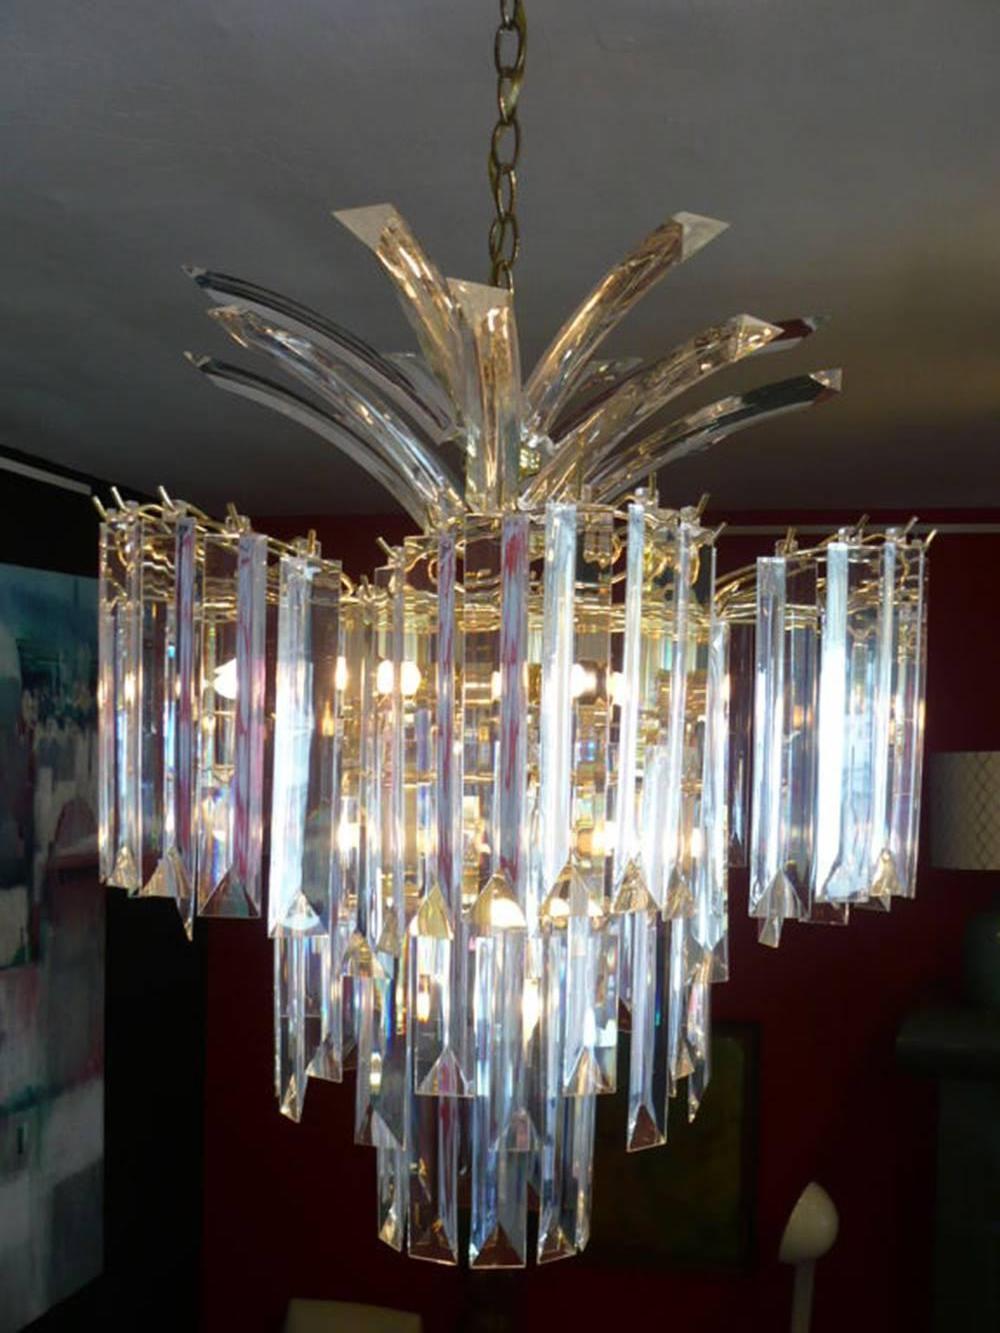 Glistening chandelier from the 1970s made of shaped Lucite crystals and a brass framework. The light source bounces the light from the central hub, reflecting throughout the Lucite.